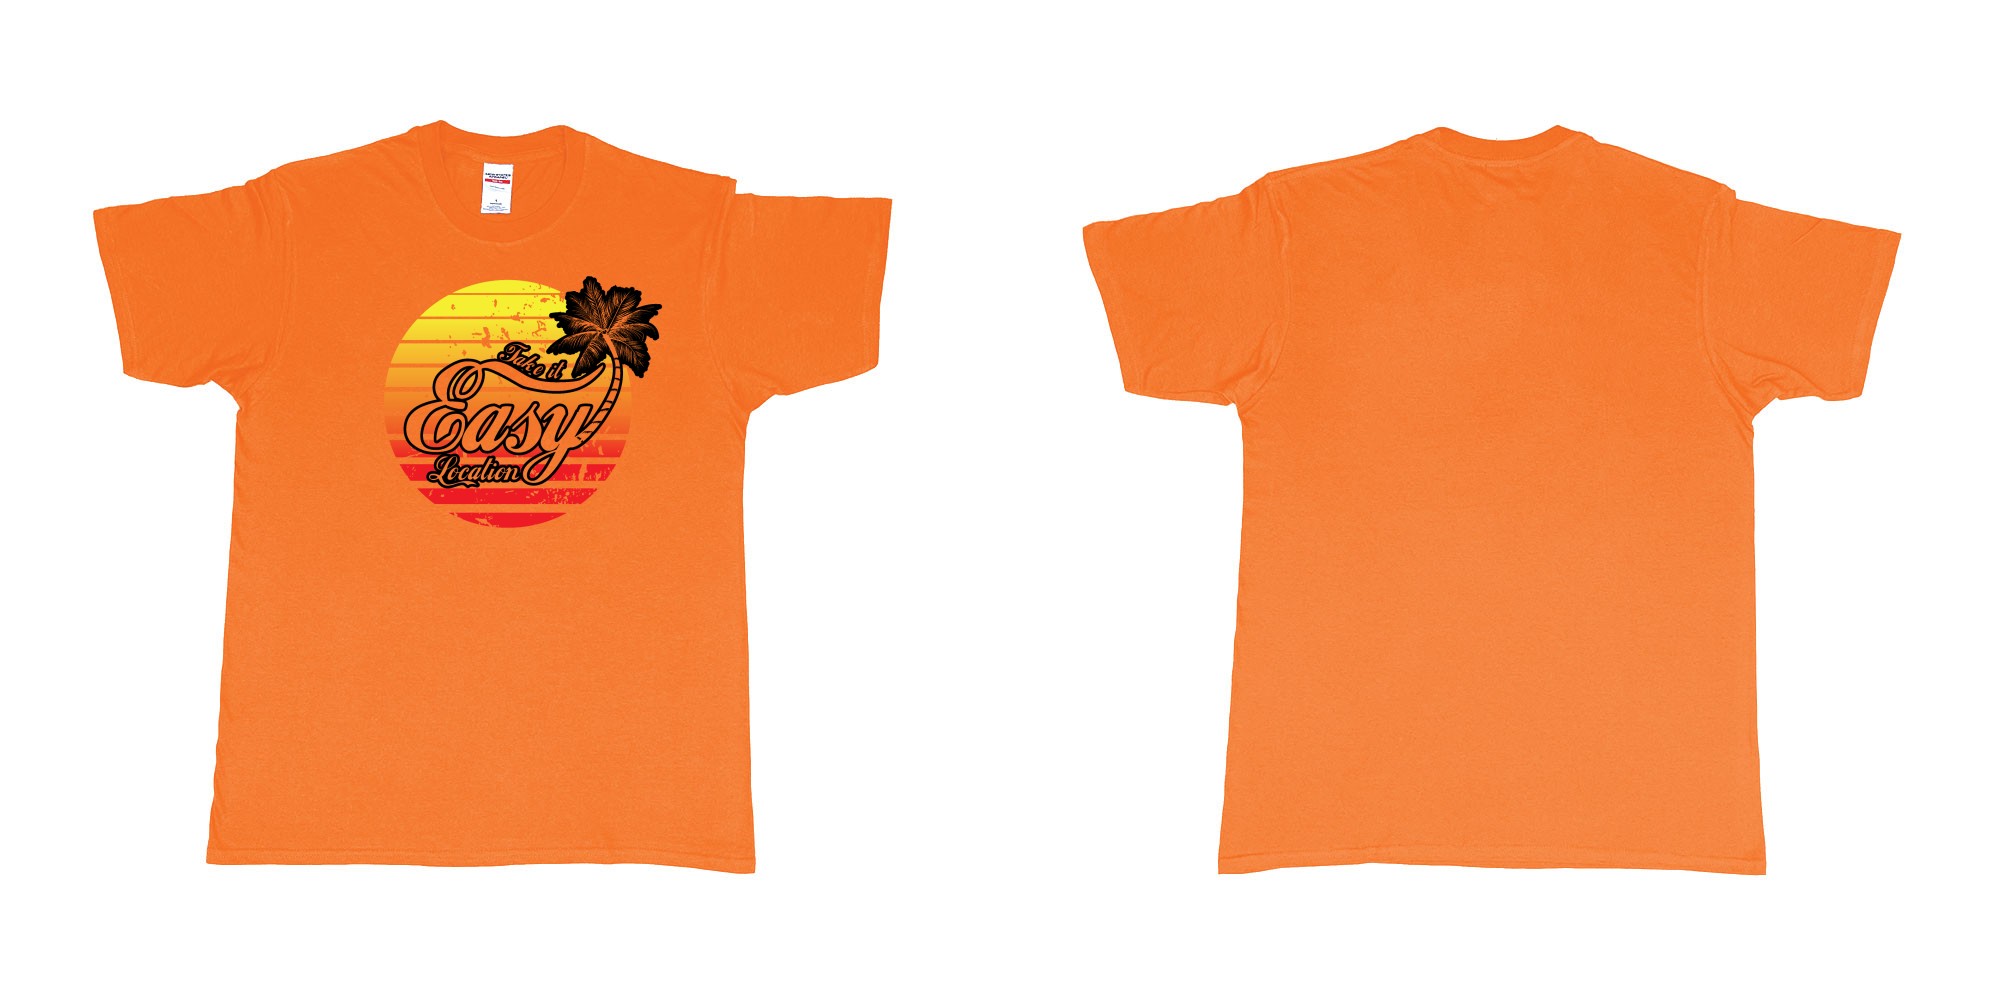 Custom tshirt design take is easy own location easy tee bali custom text printing in fabric color orange choice your own text made in Bali by The Pirate Way